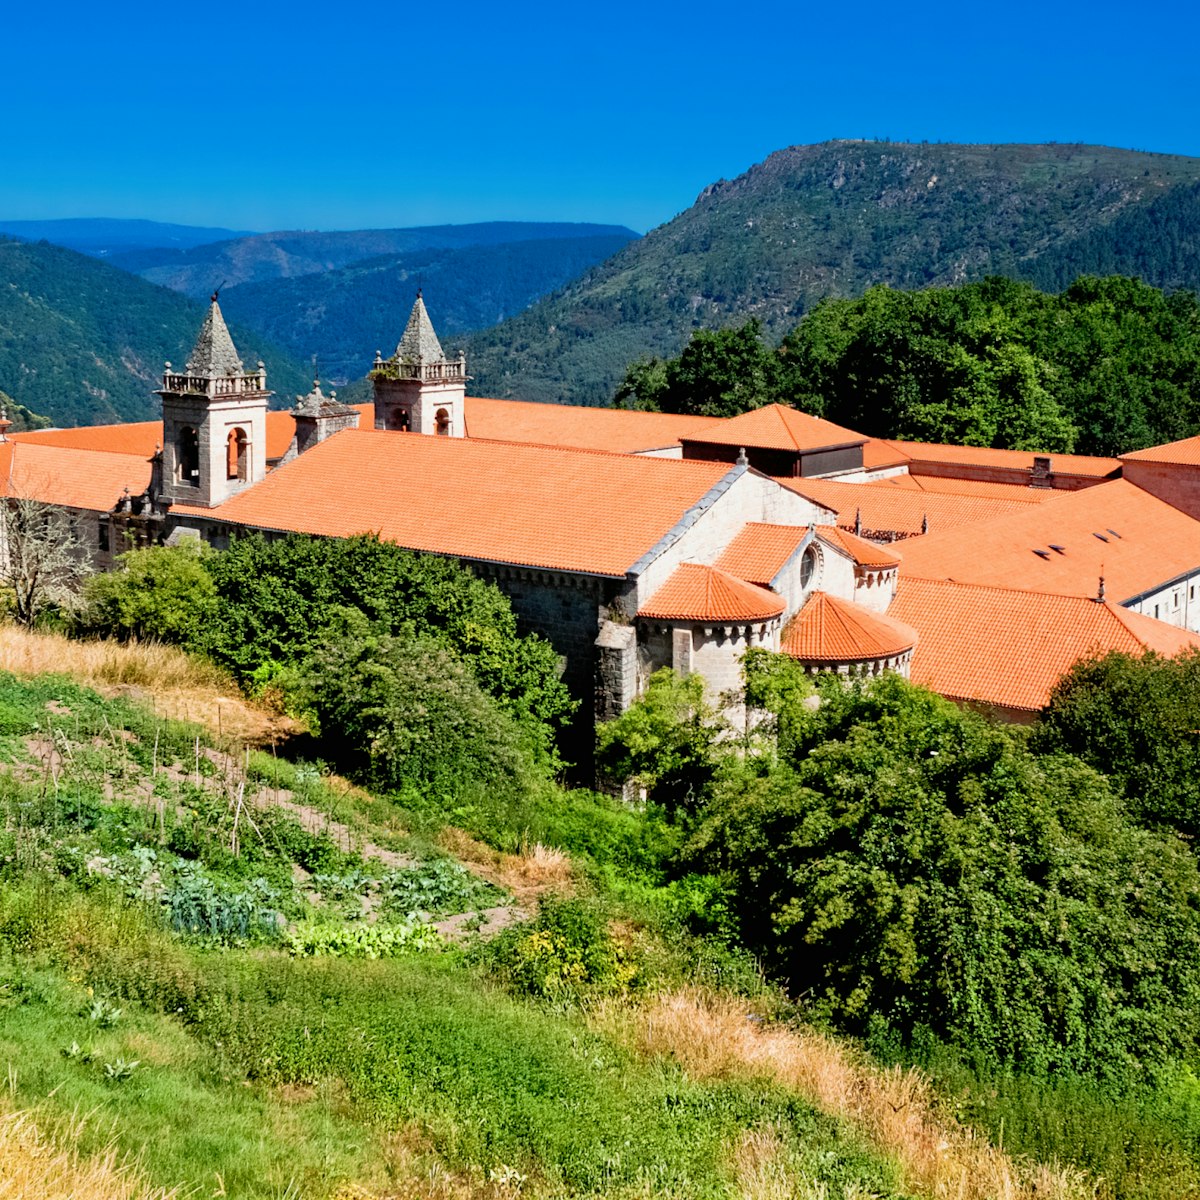 Santo Estevo Monastery. Galicia, Spain.; Shutterstock ID 309514889; Your name (First / Last): Tom Stainer; GL account no.: 65050 ; Netsuite department name: Online Editorial ; Full Product or Project name including edition: Best in Europe 2017